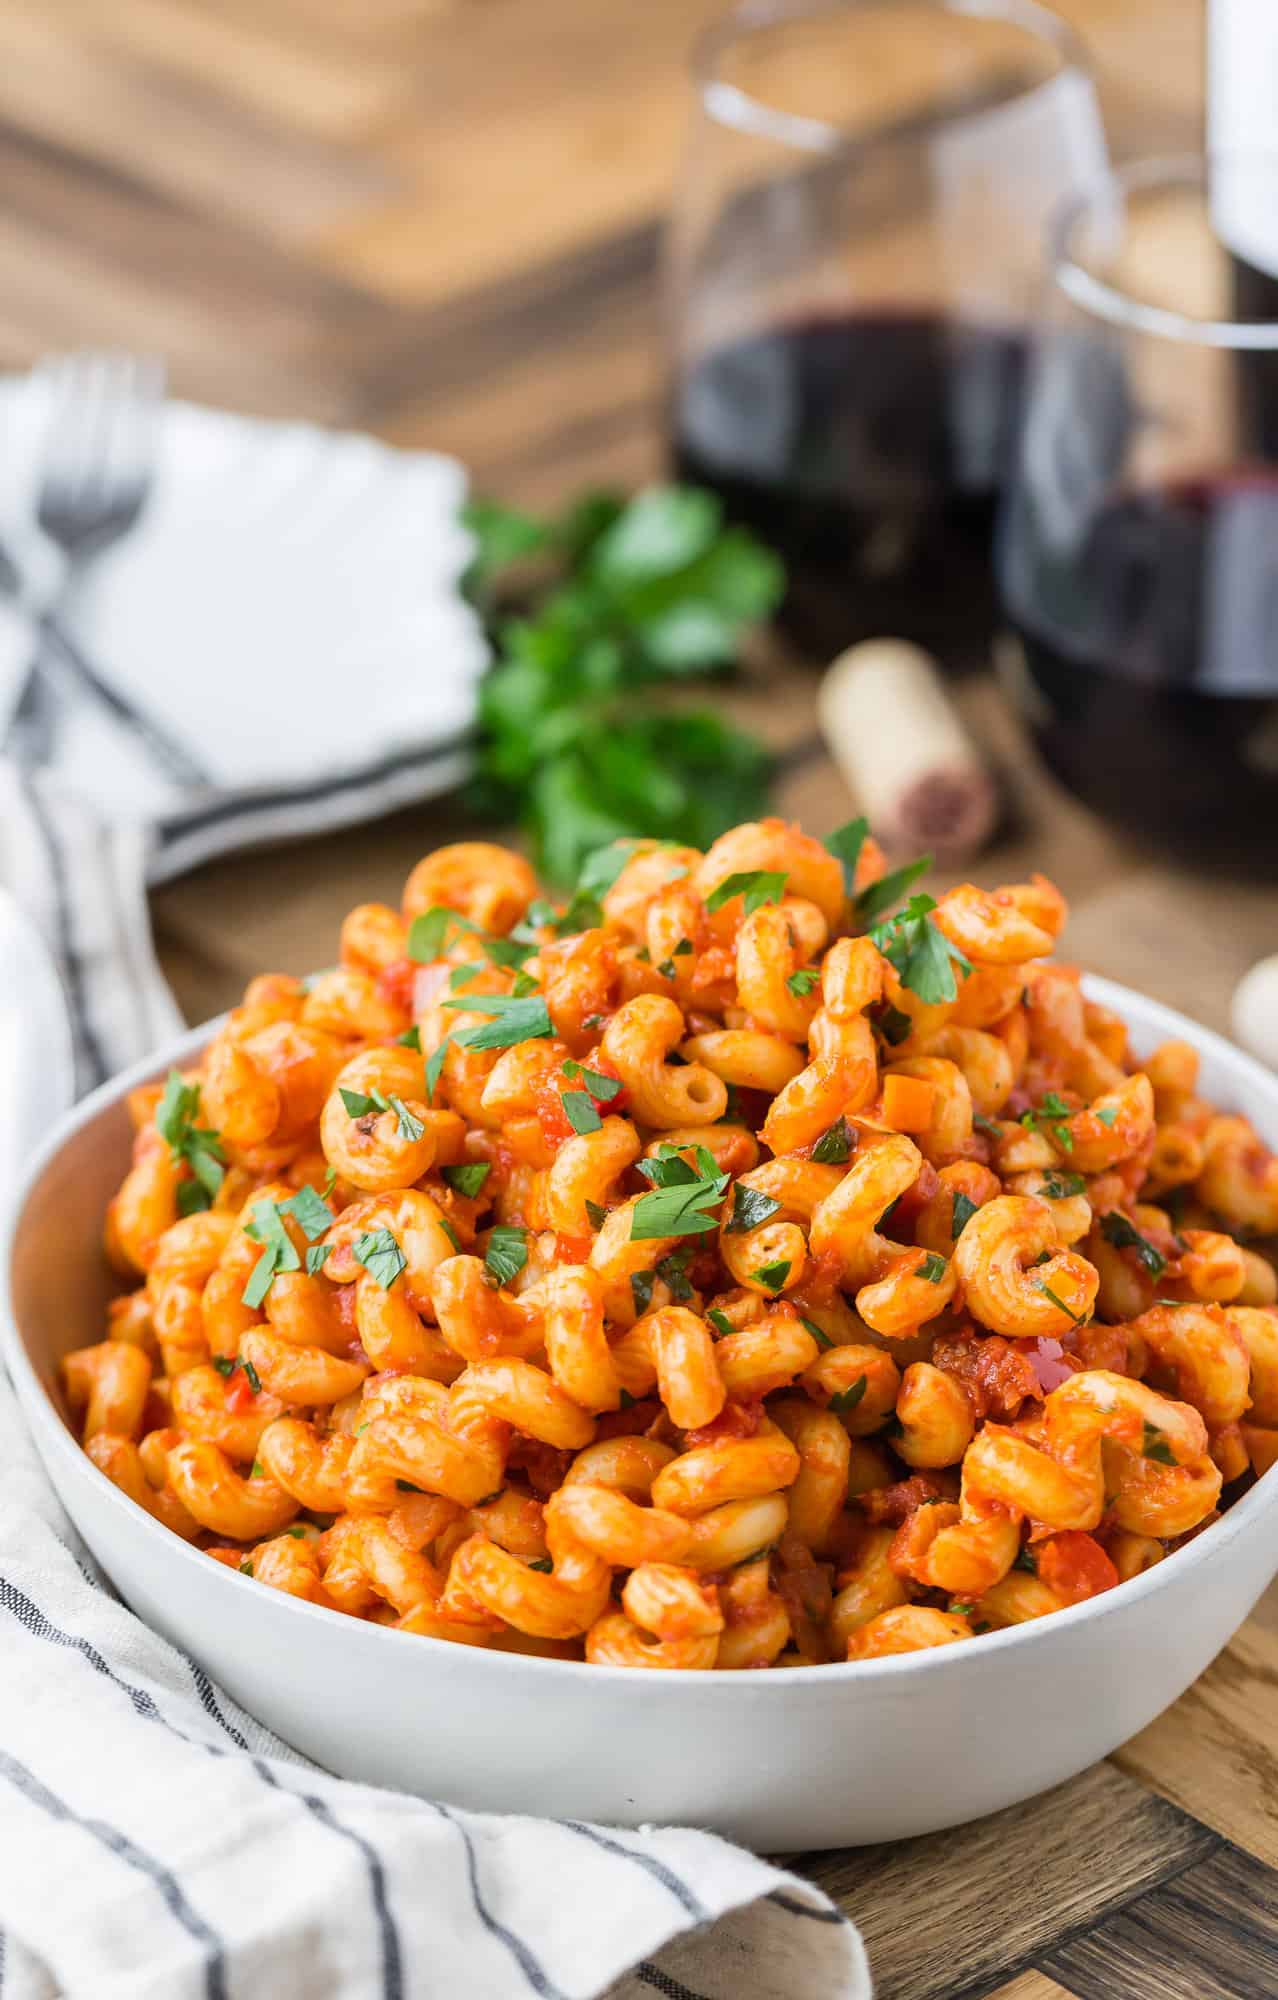 Pasta with pancetta and tomato sauce in bowl.